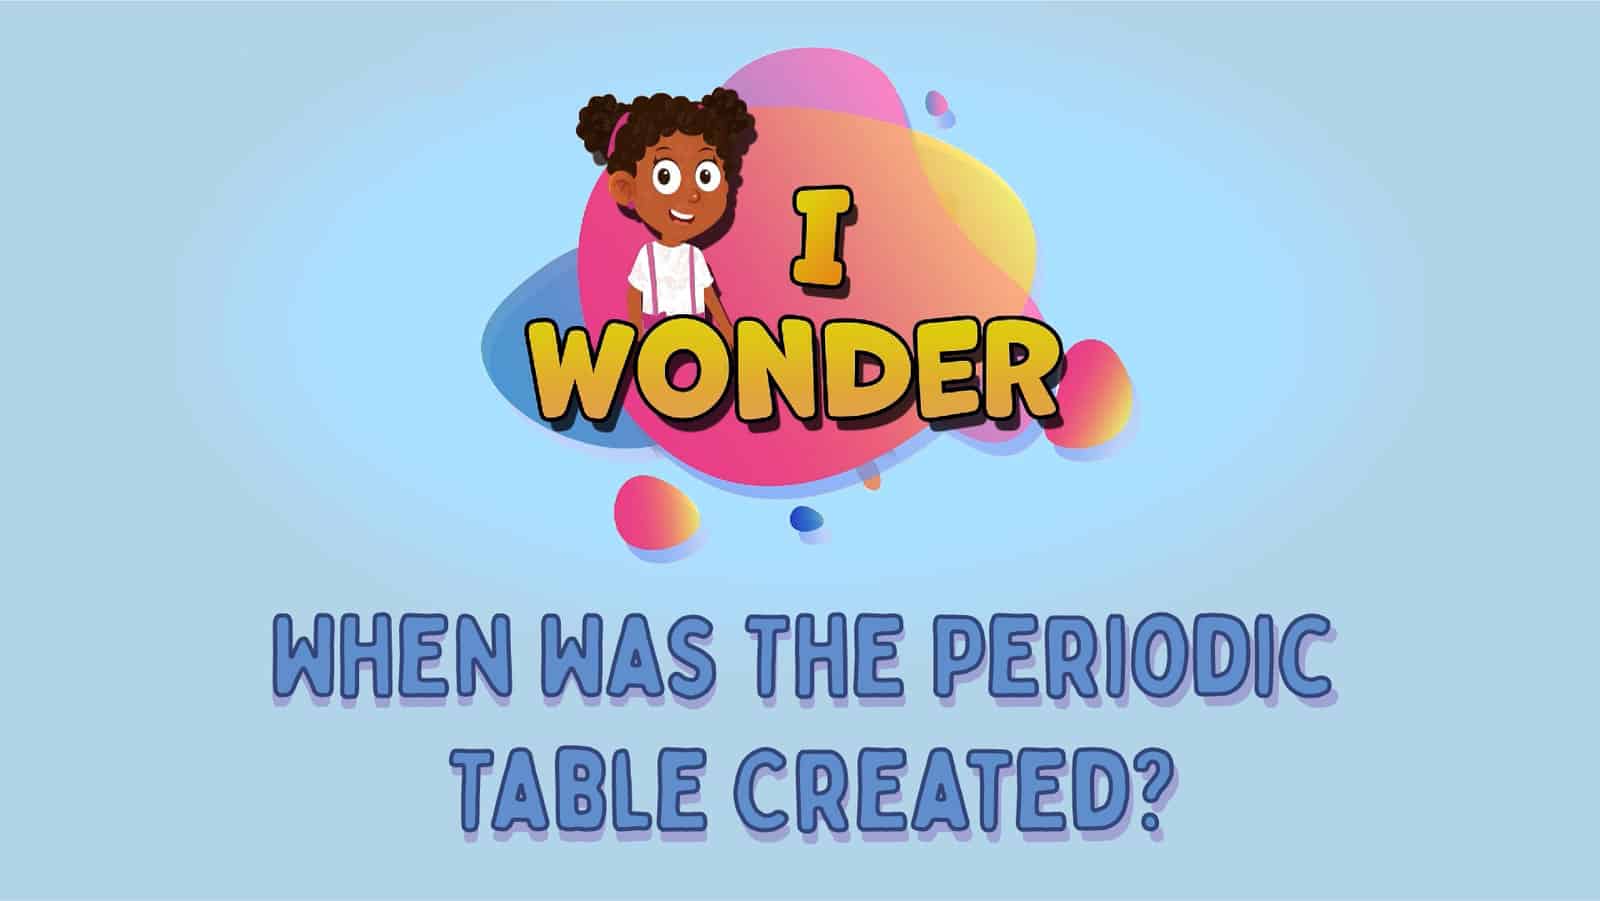 When Was The Periodic Table Created?